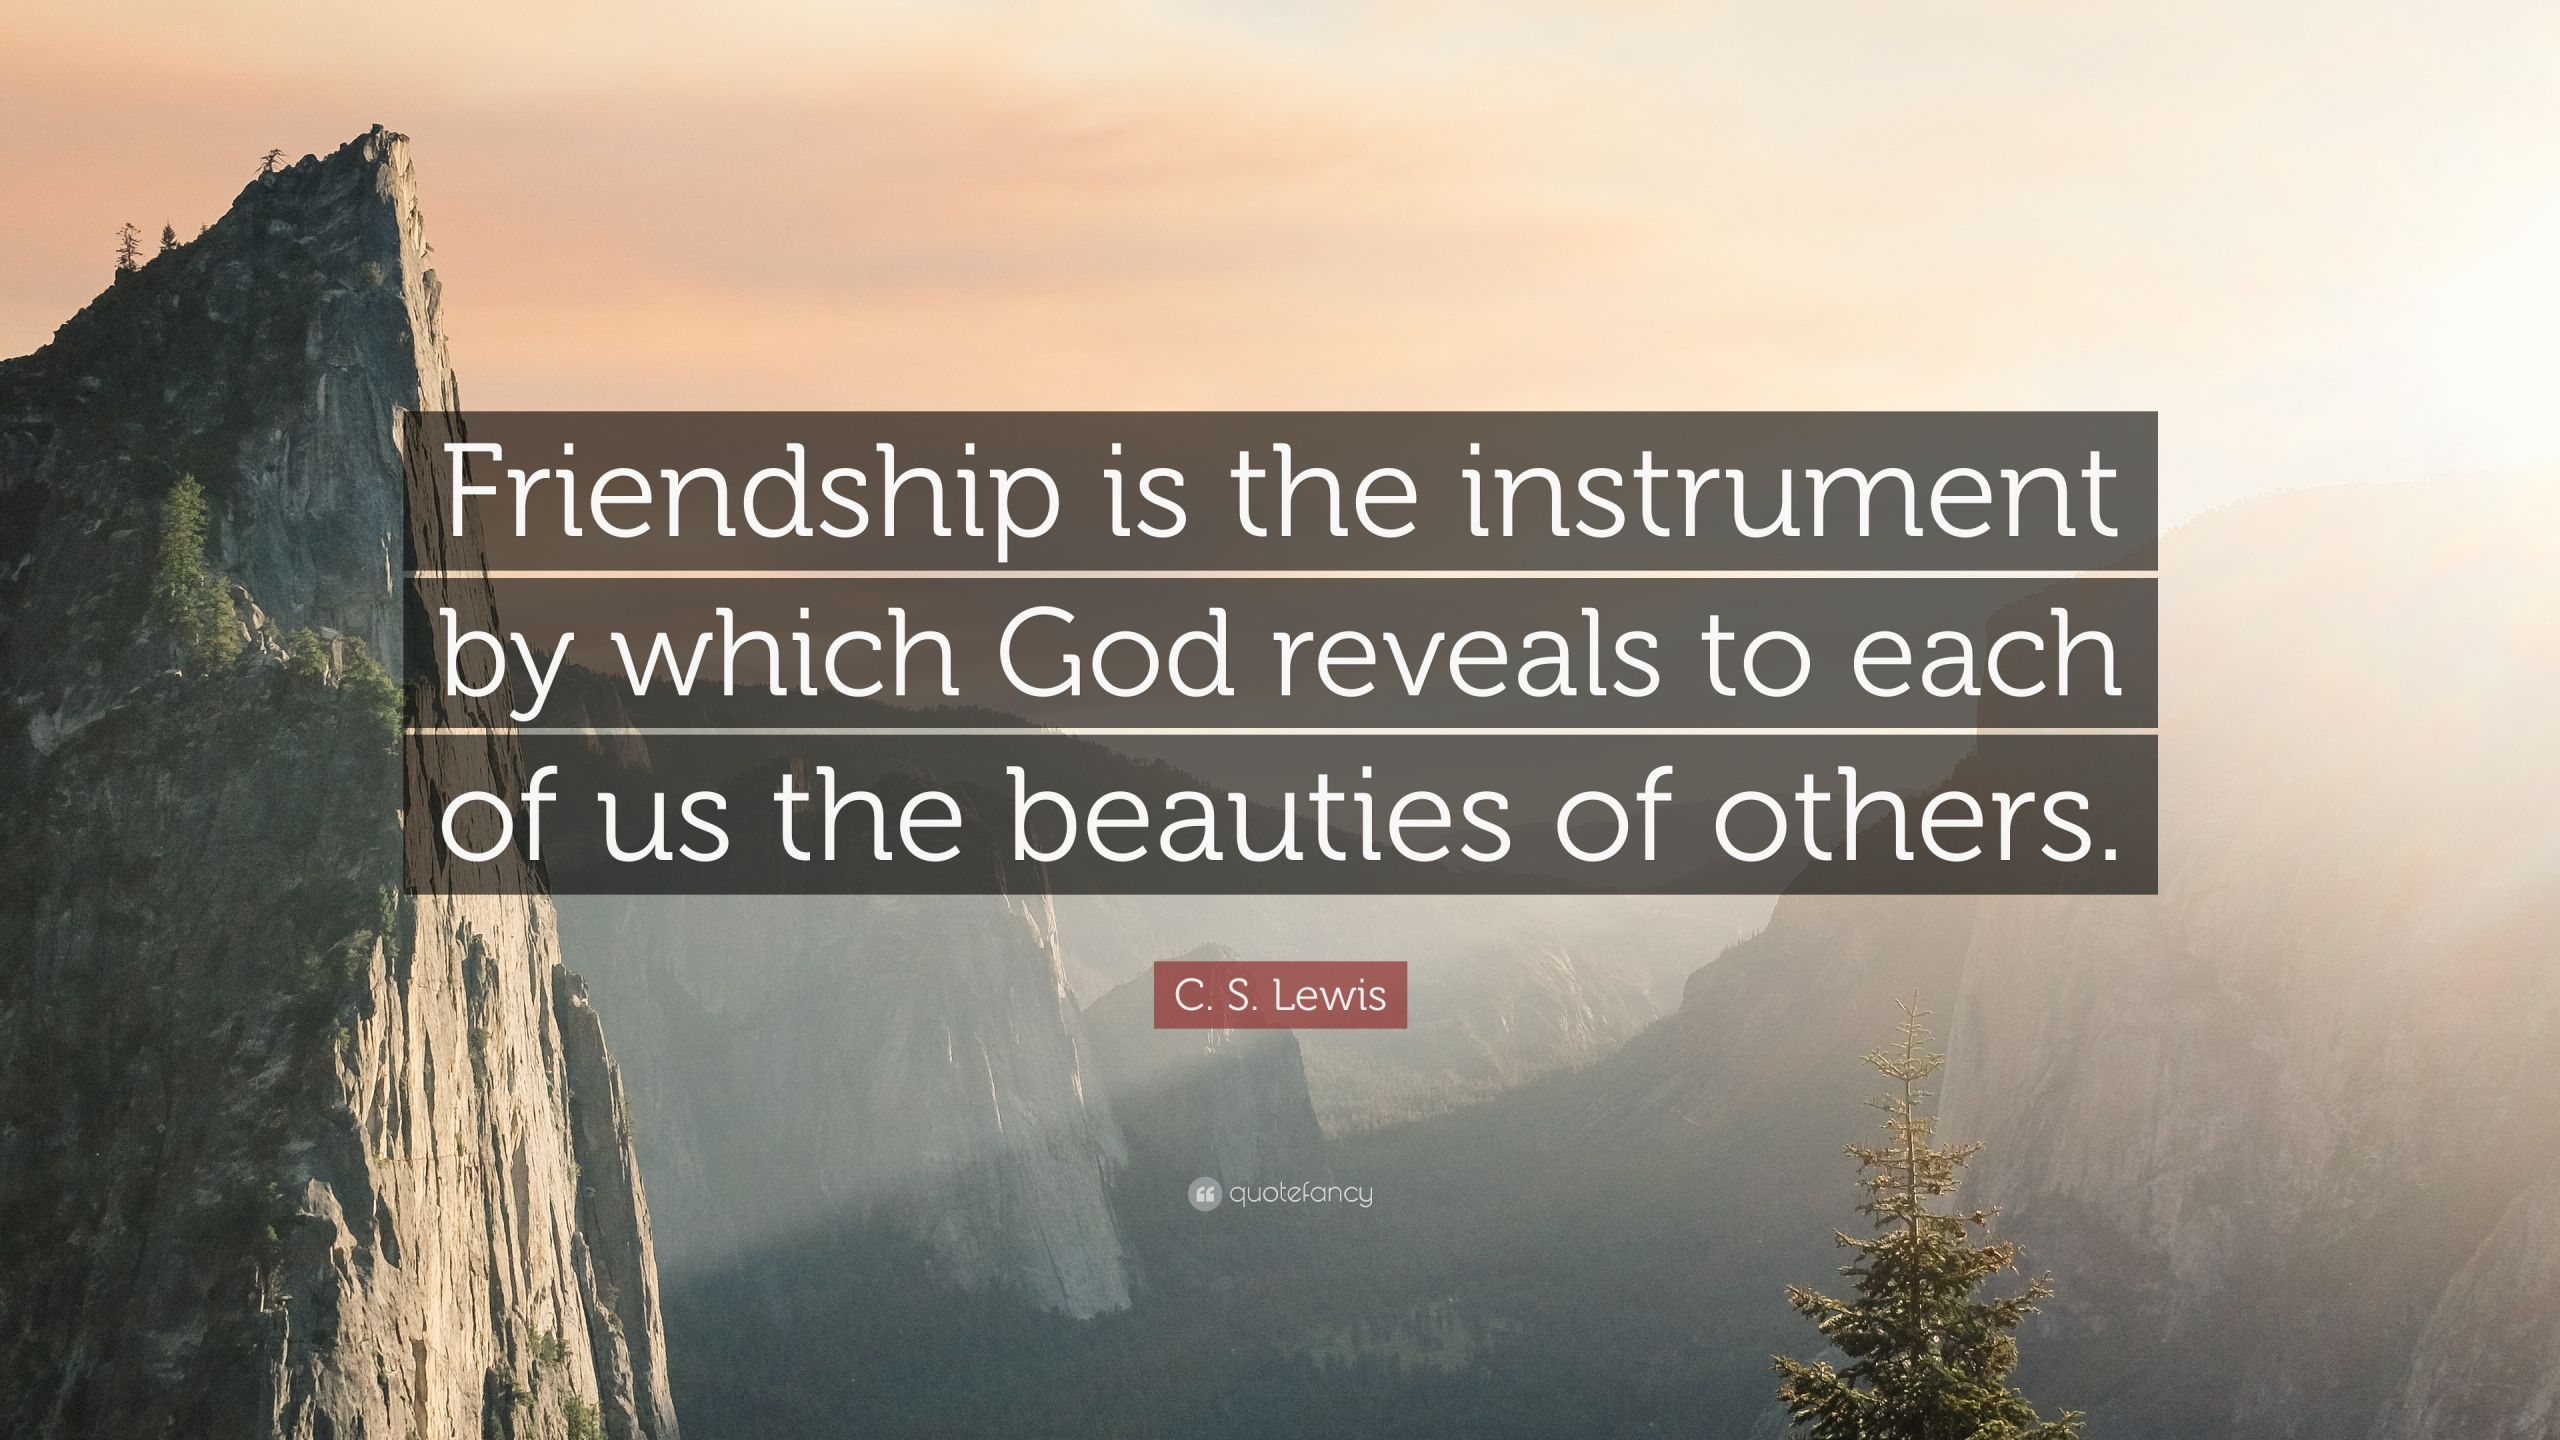 C.S Lewis Quotes On Friendship
 C S Lewis Quote “Friendship is the instrument by which